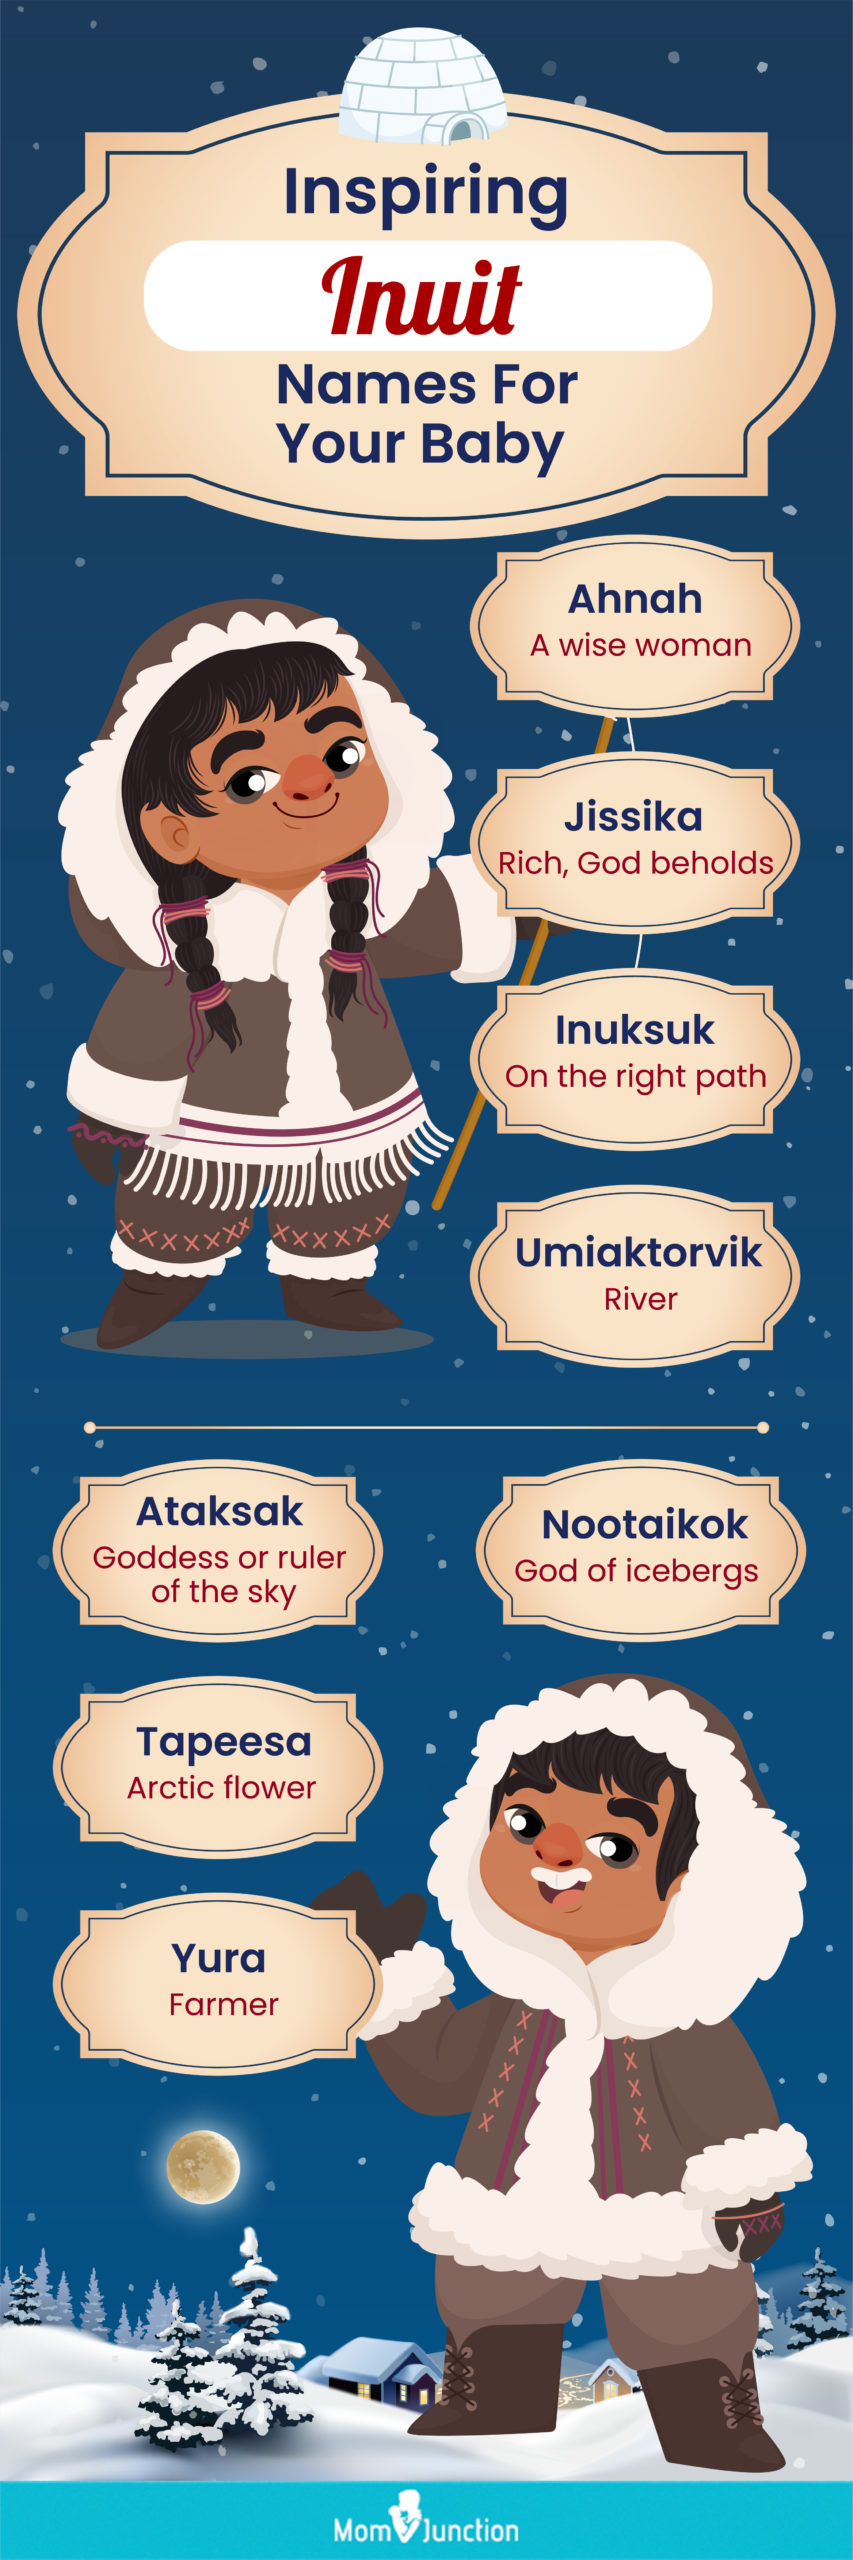 inspiring inuit names for your baby (infographic)